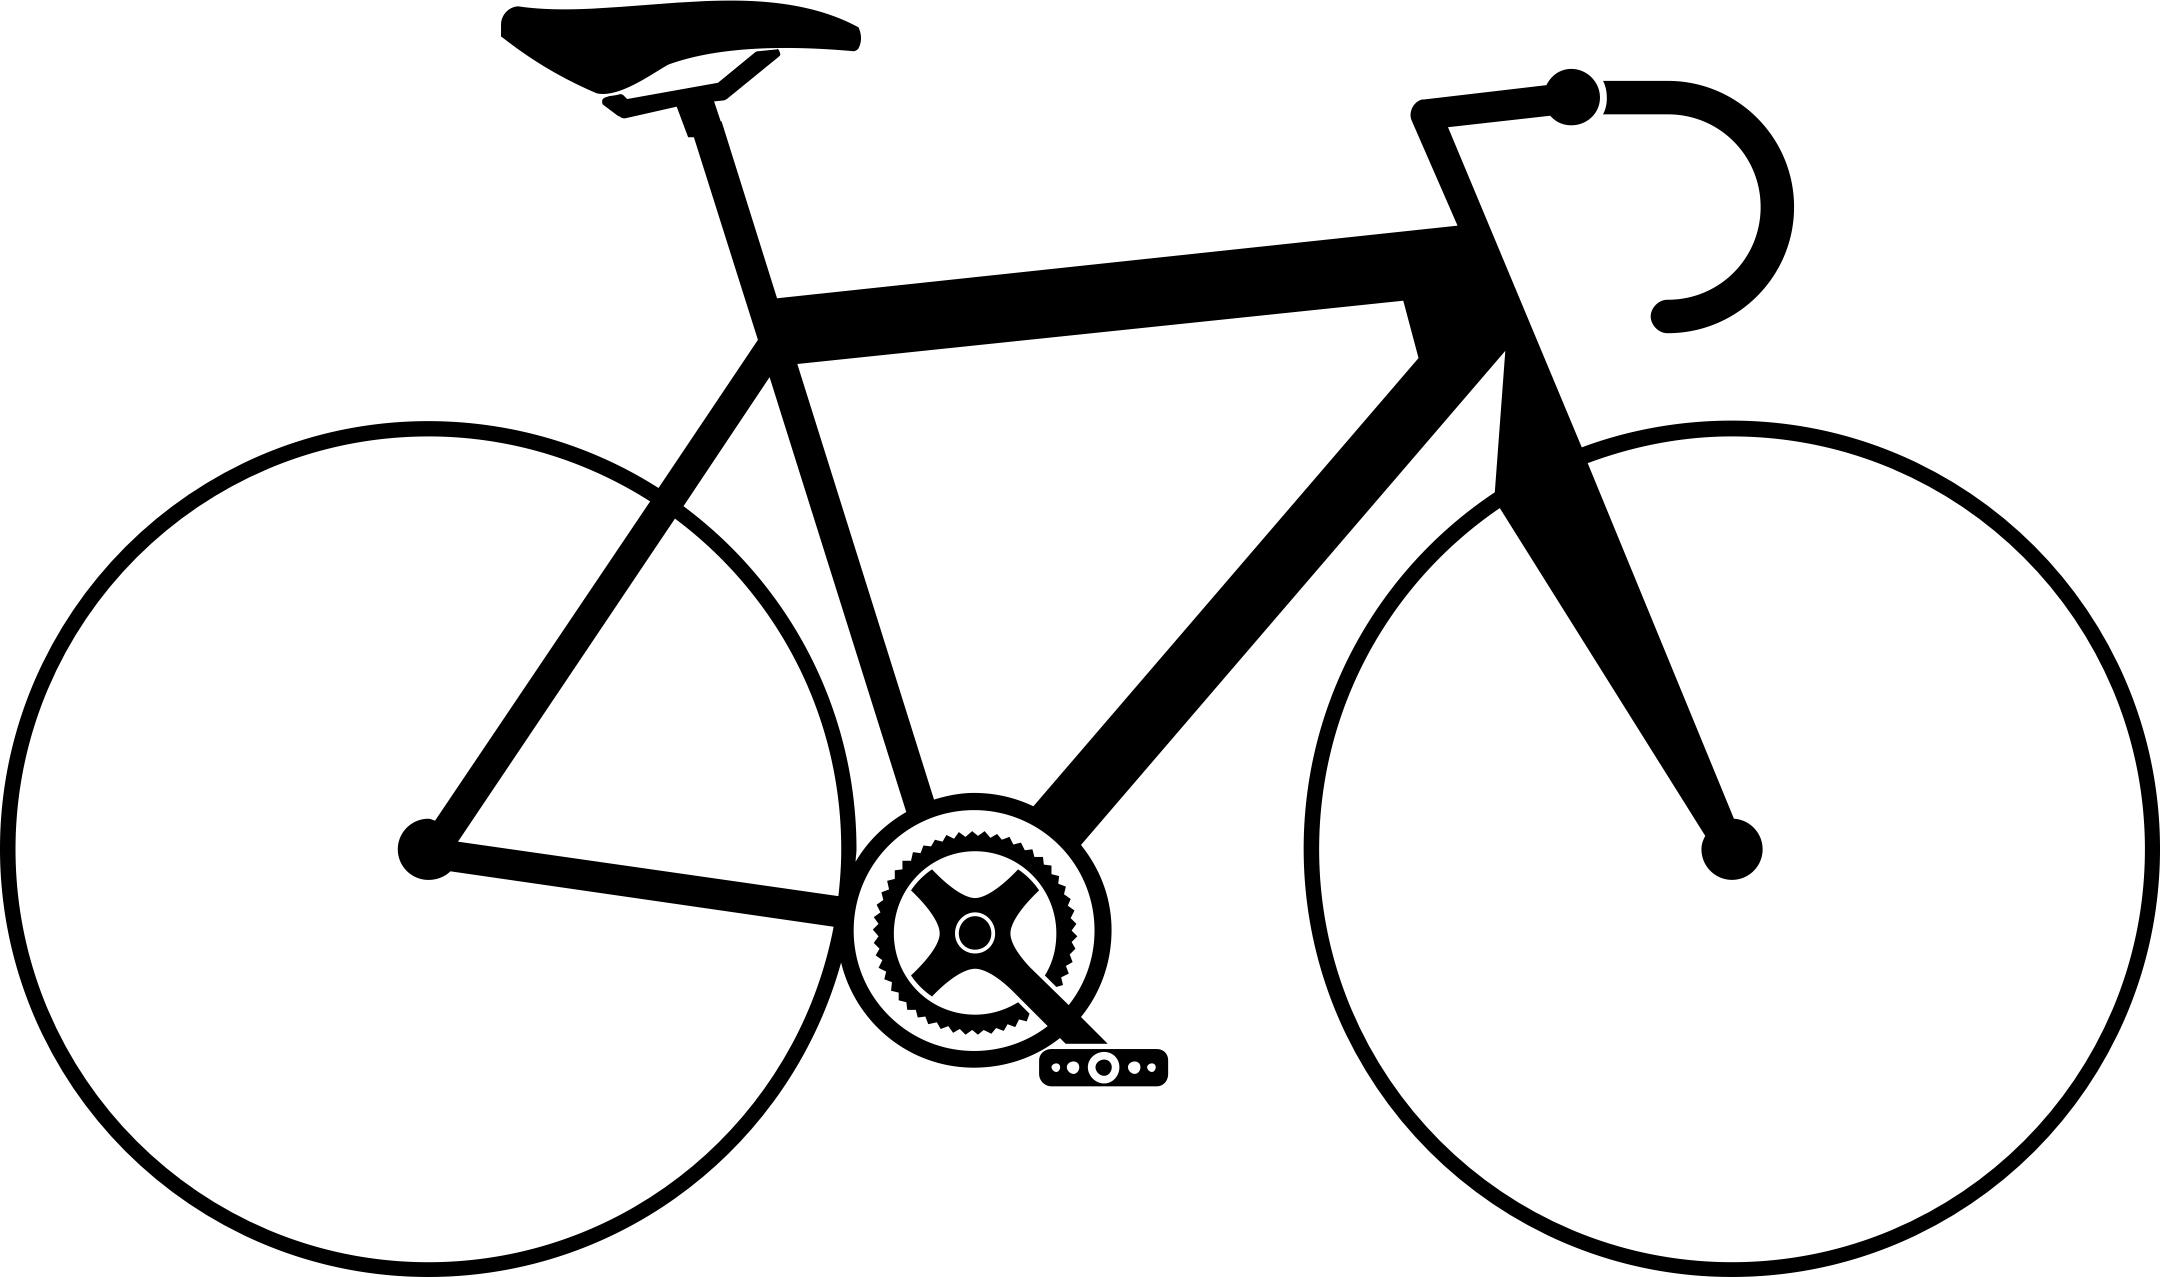 Sport bike PNG icons